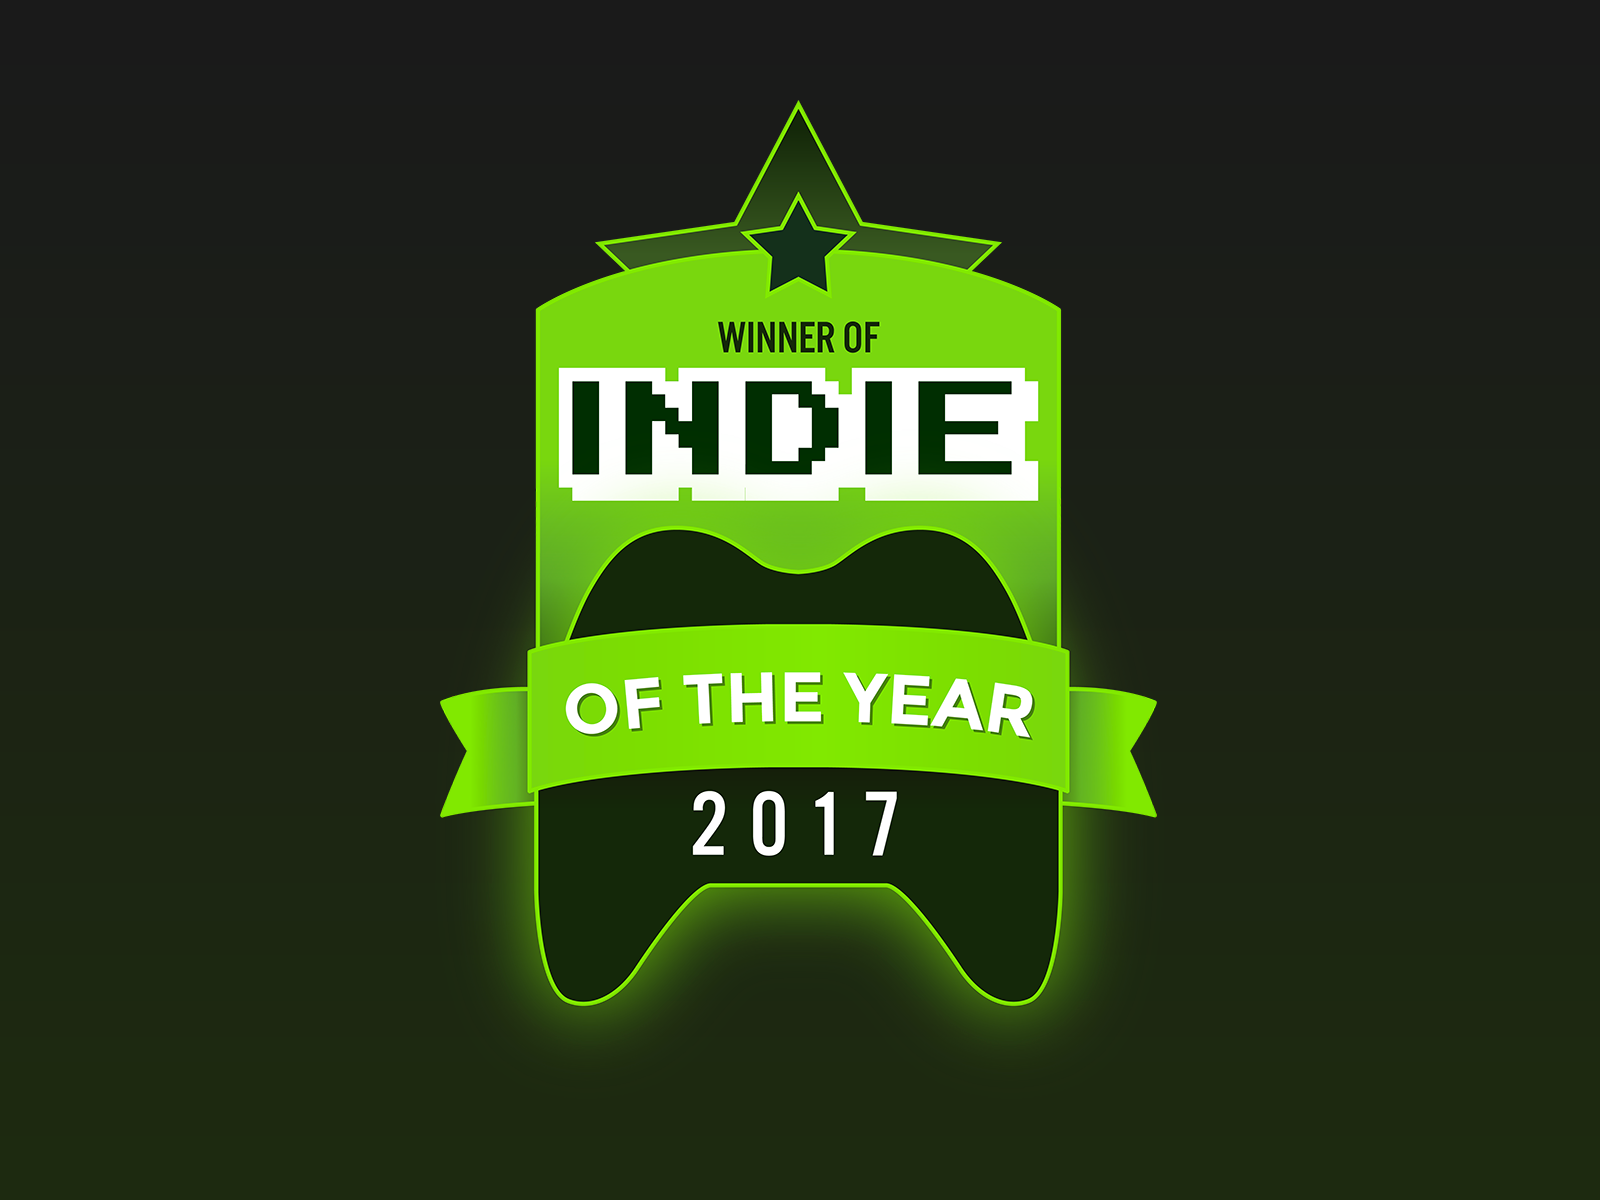 The Game of the Year 2017 Winner